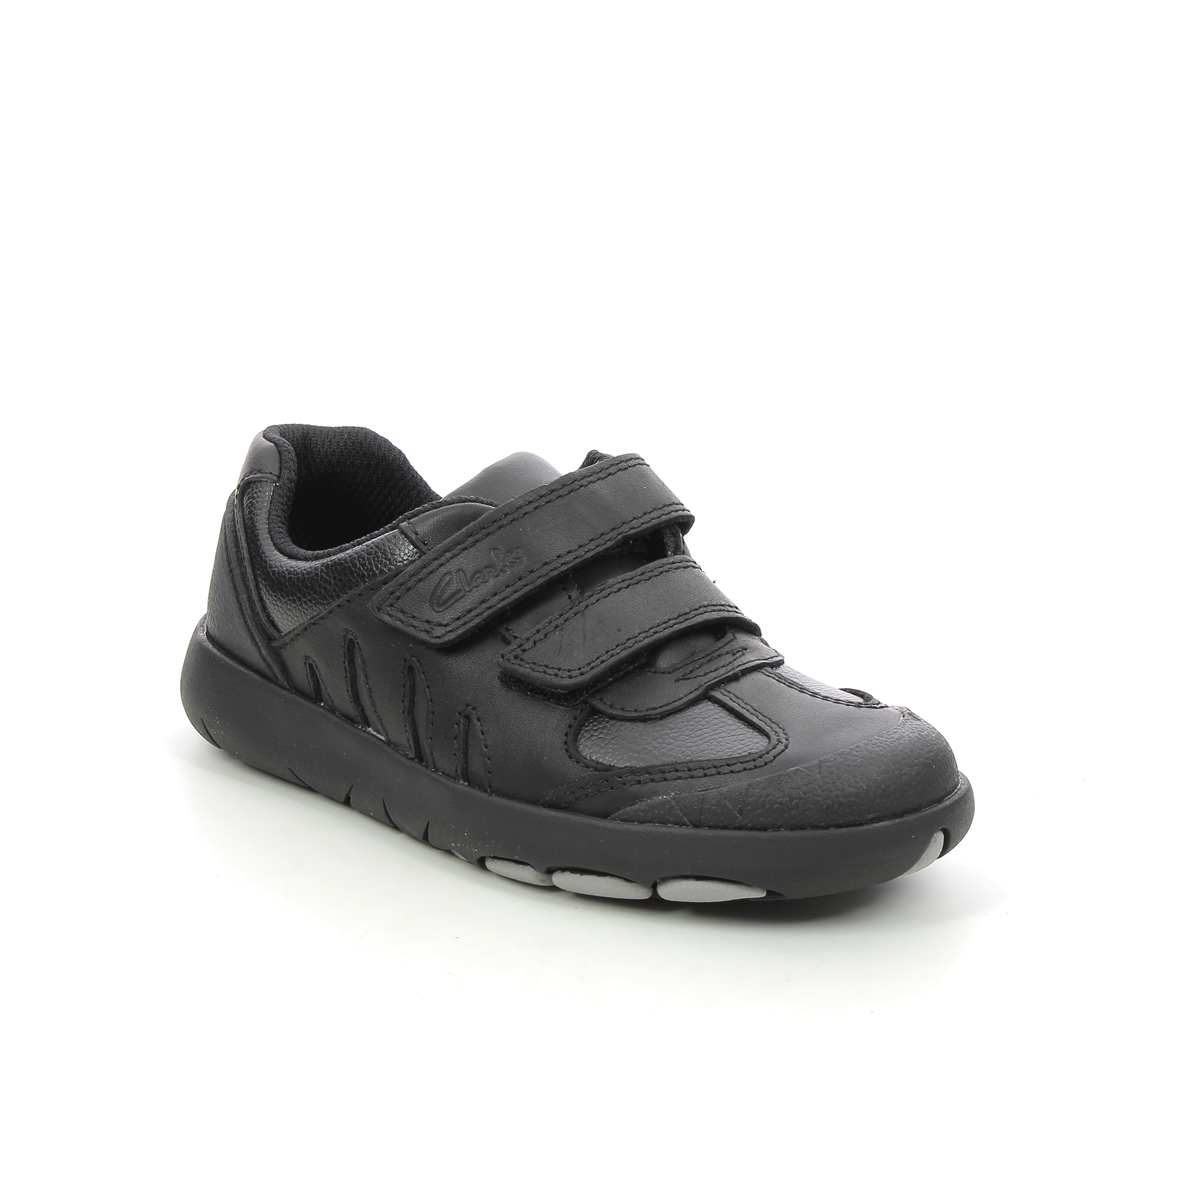 Clarks Rex Stride K Black leather Kids Boys Shoes 6269-88H in a Plain Leather in Size 12